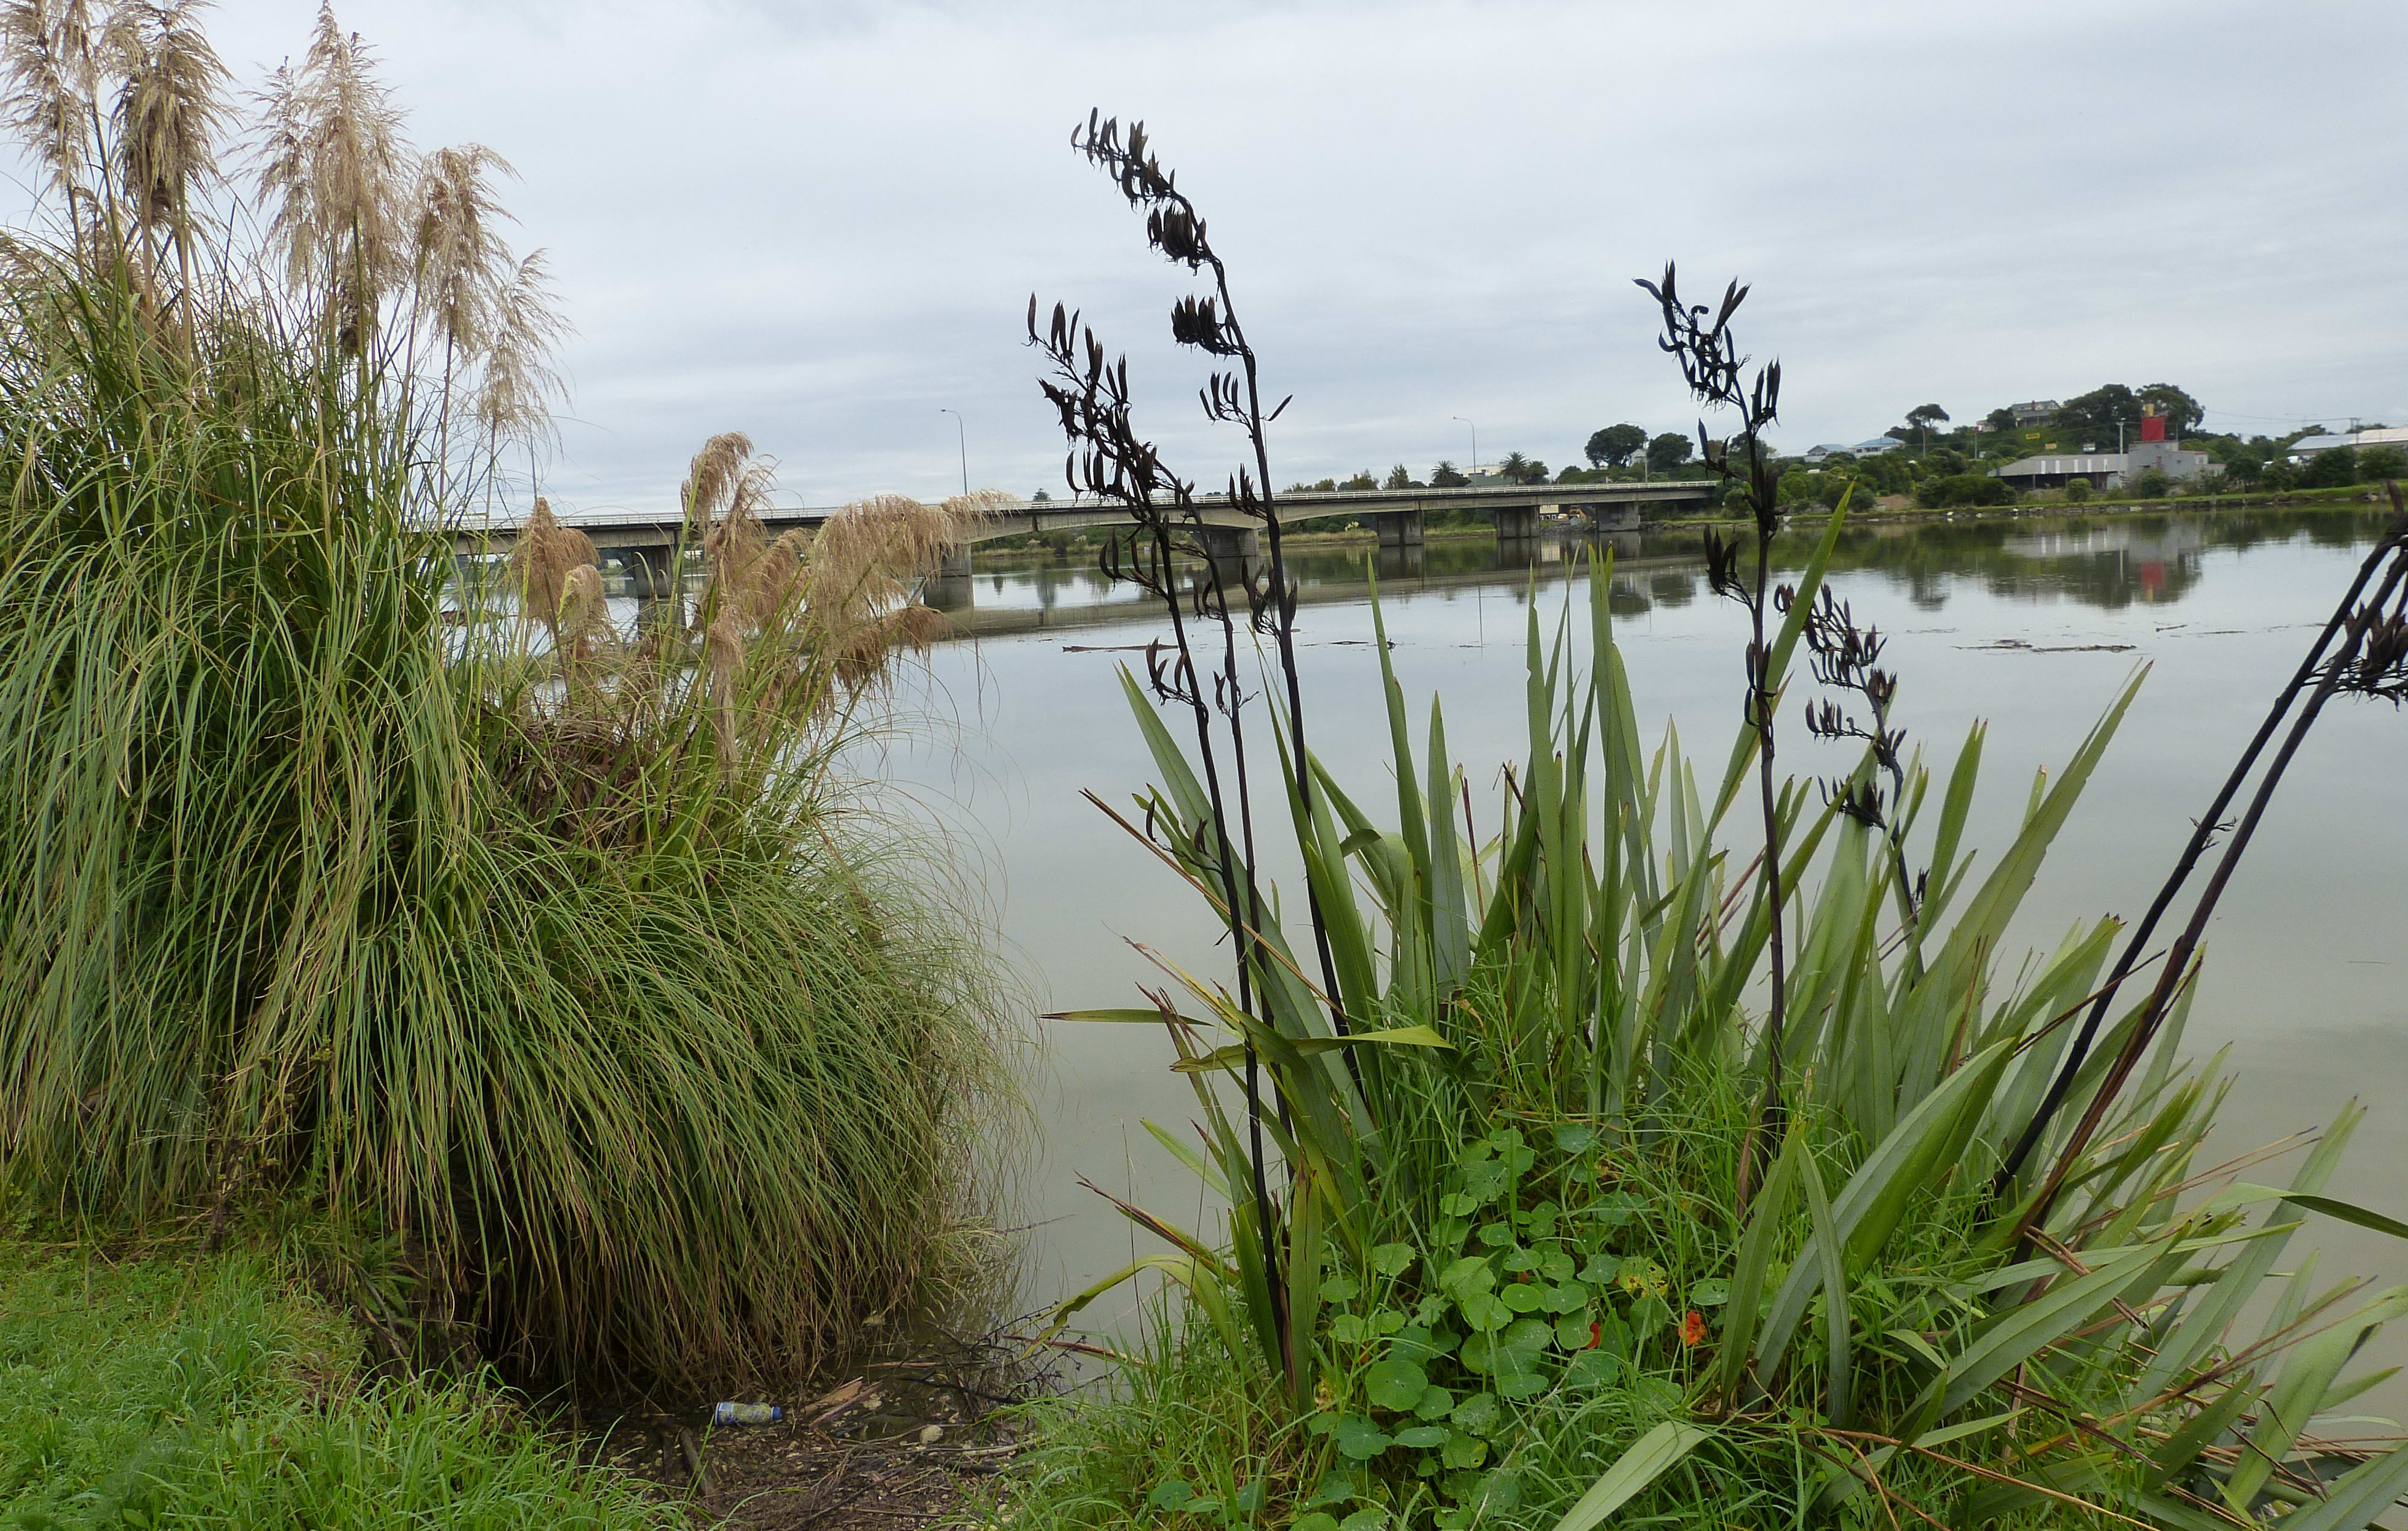 View of the Whanganui River from the Putiki bank where the kura is located, looking towards the bridge into the city.